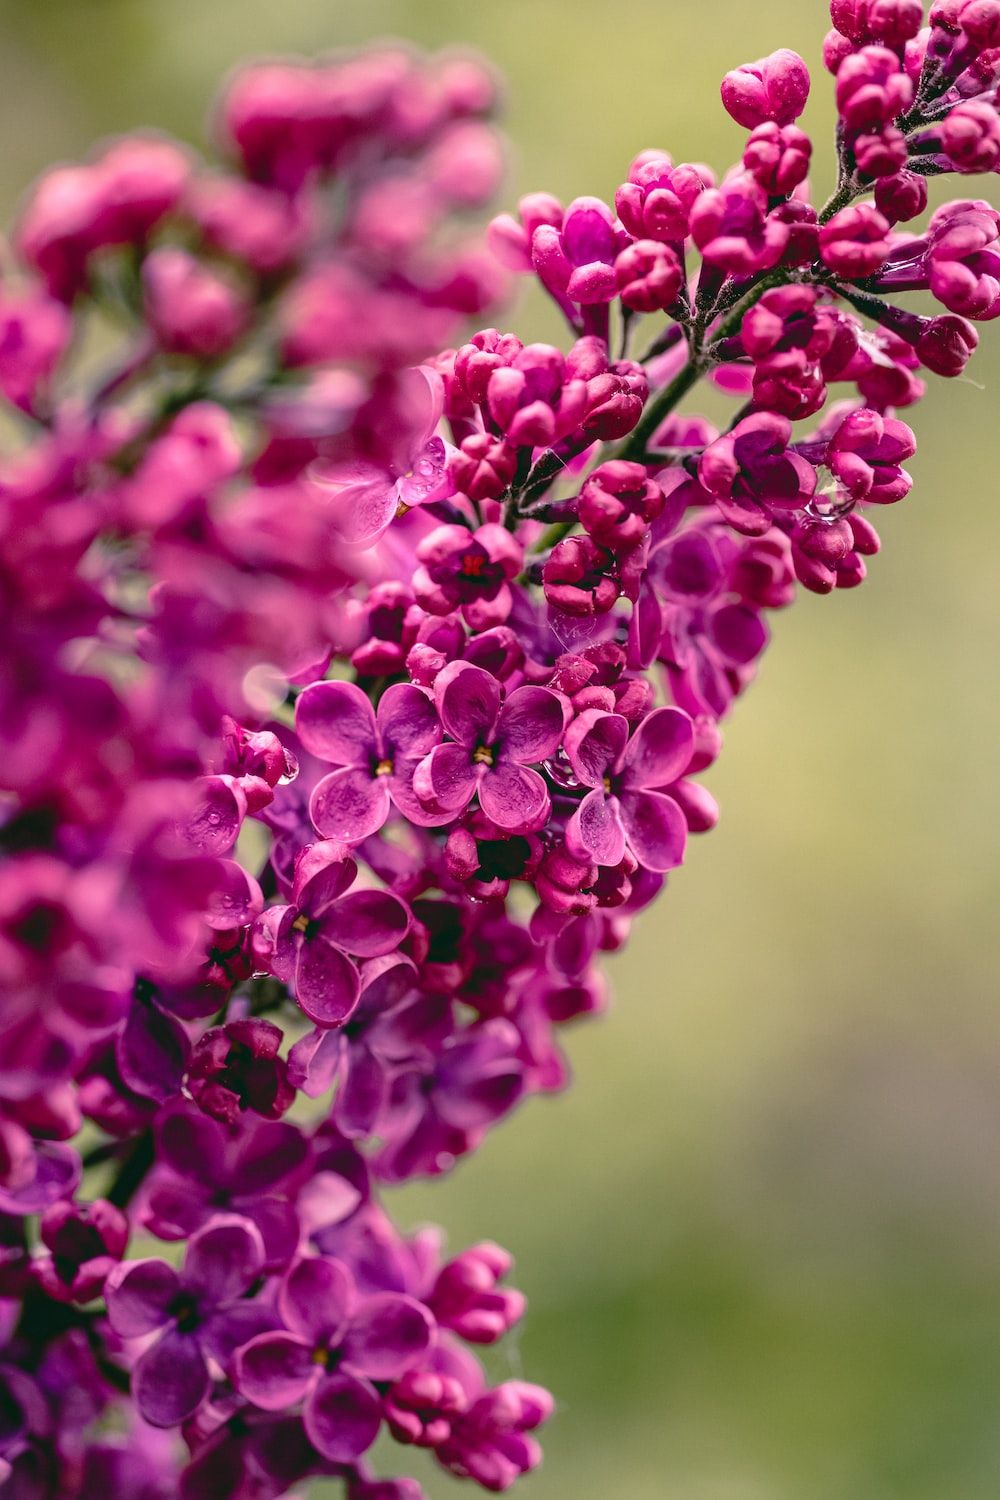 A close up of a branch of purple lilac flowers - Spring